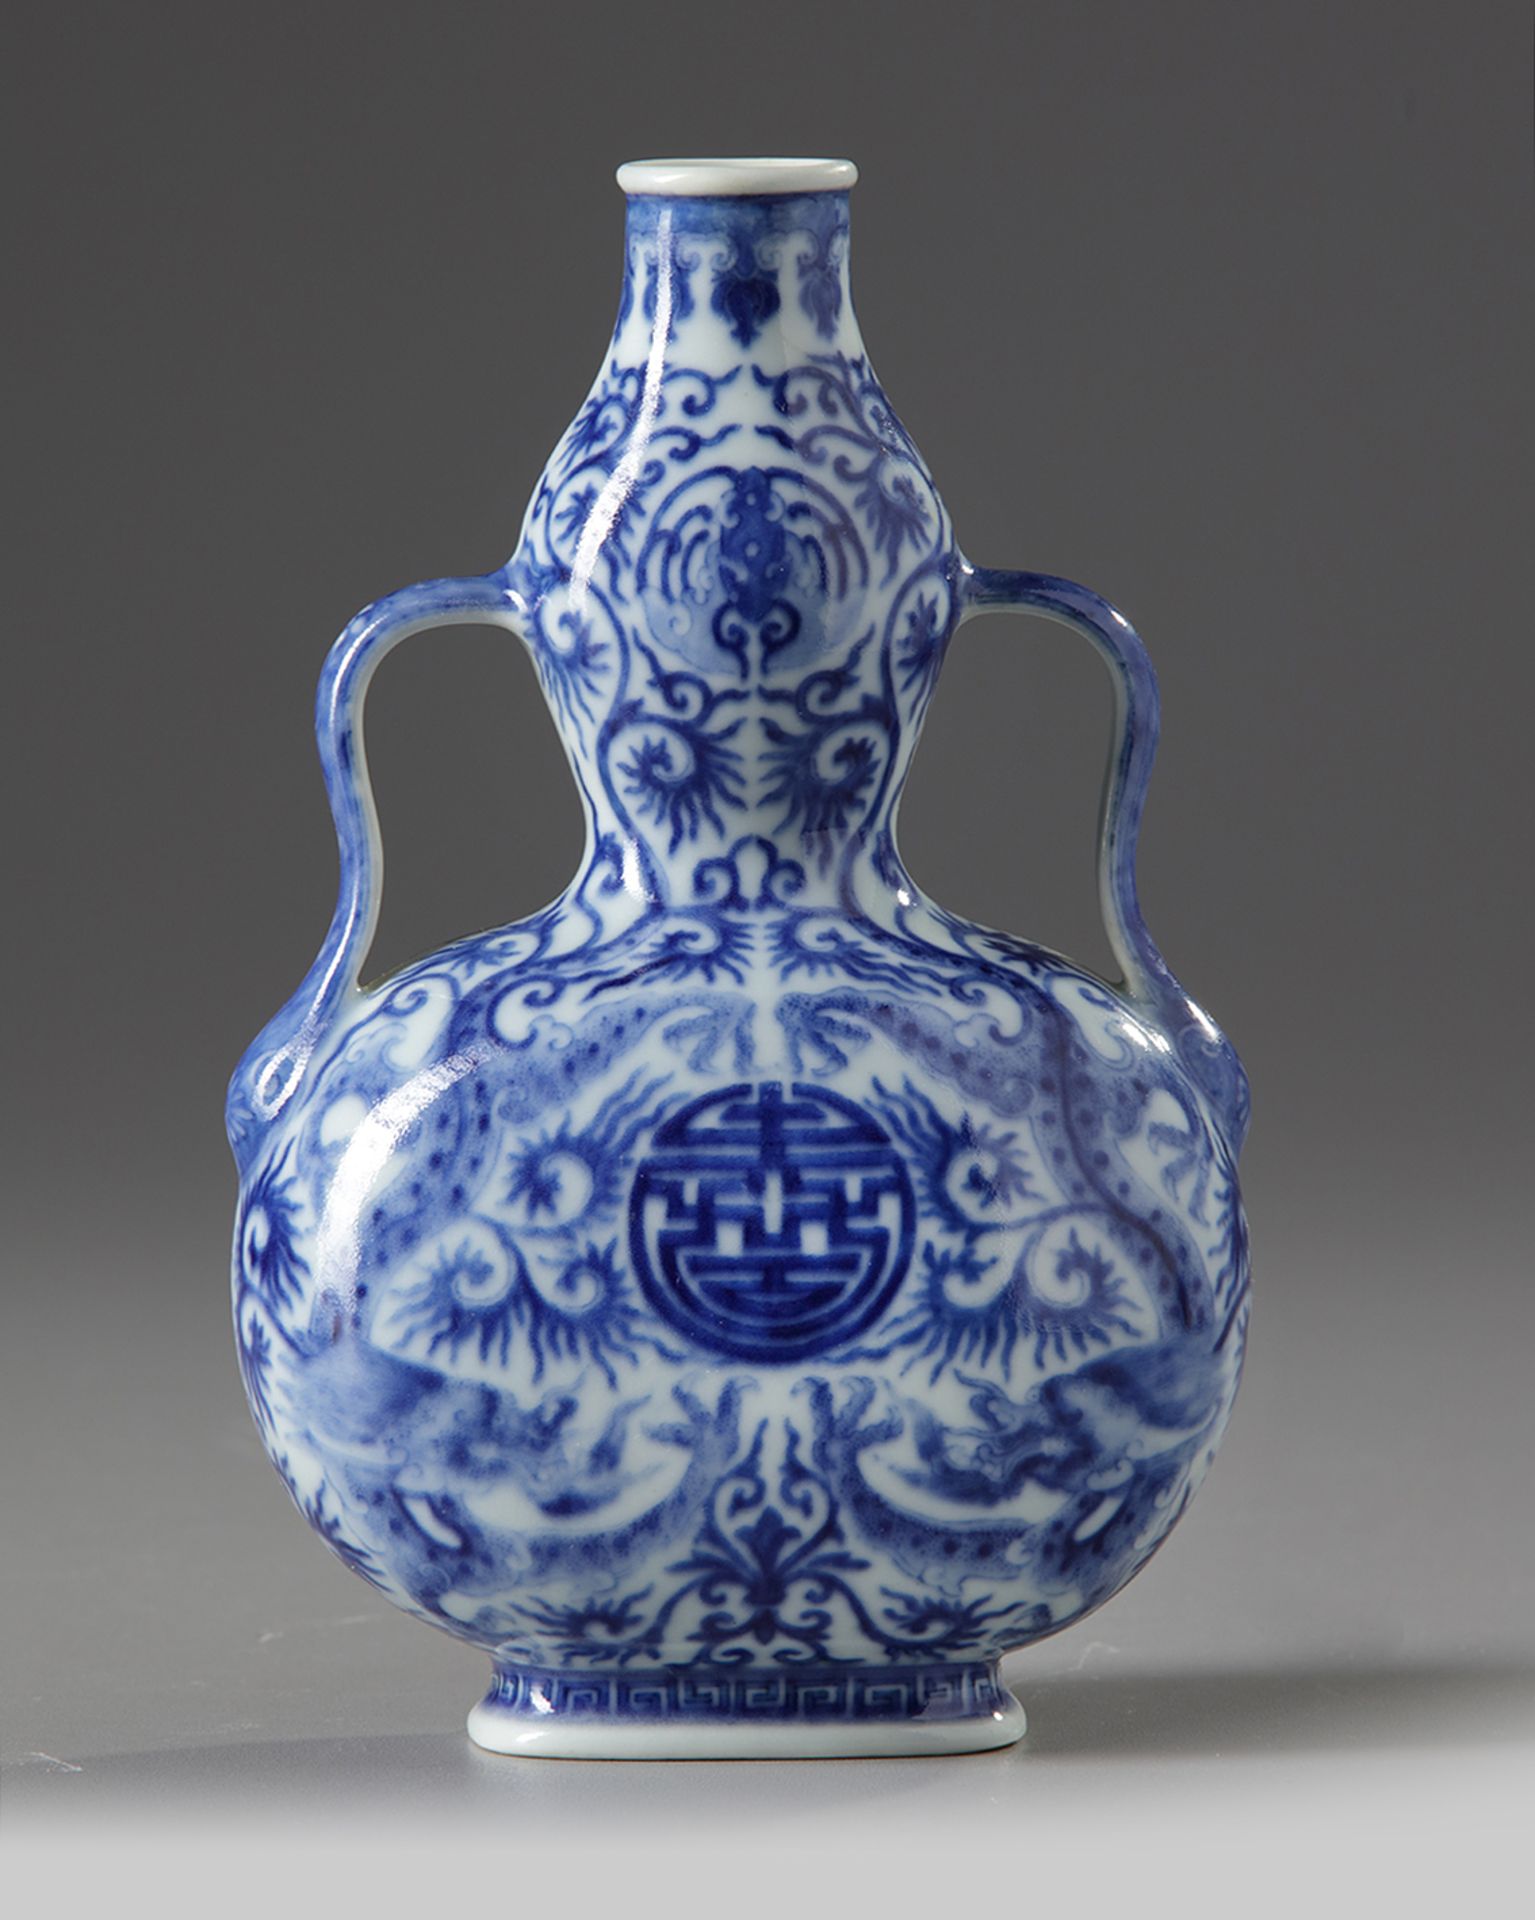 A CHINESE BLUE AND WHITE DOUBLE GOURD DRAGON VASE, QIANLONG SIX-CHARACTER SEAL MARK IN UNDERGLAZE BL